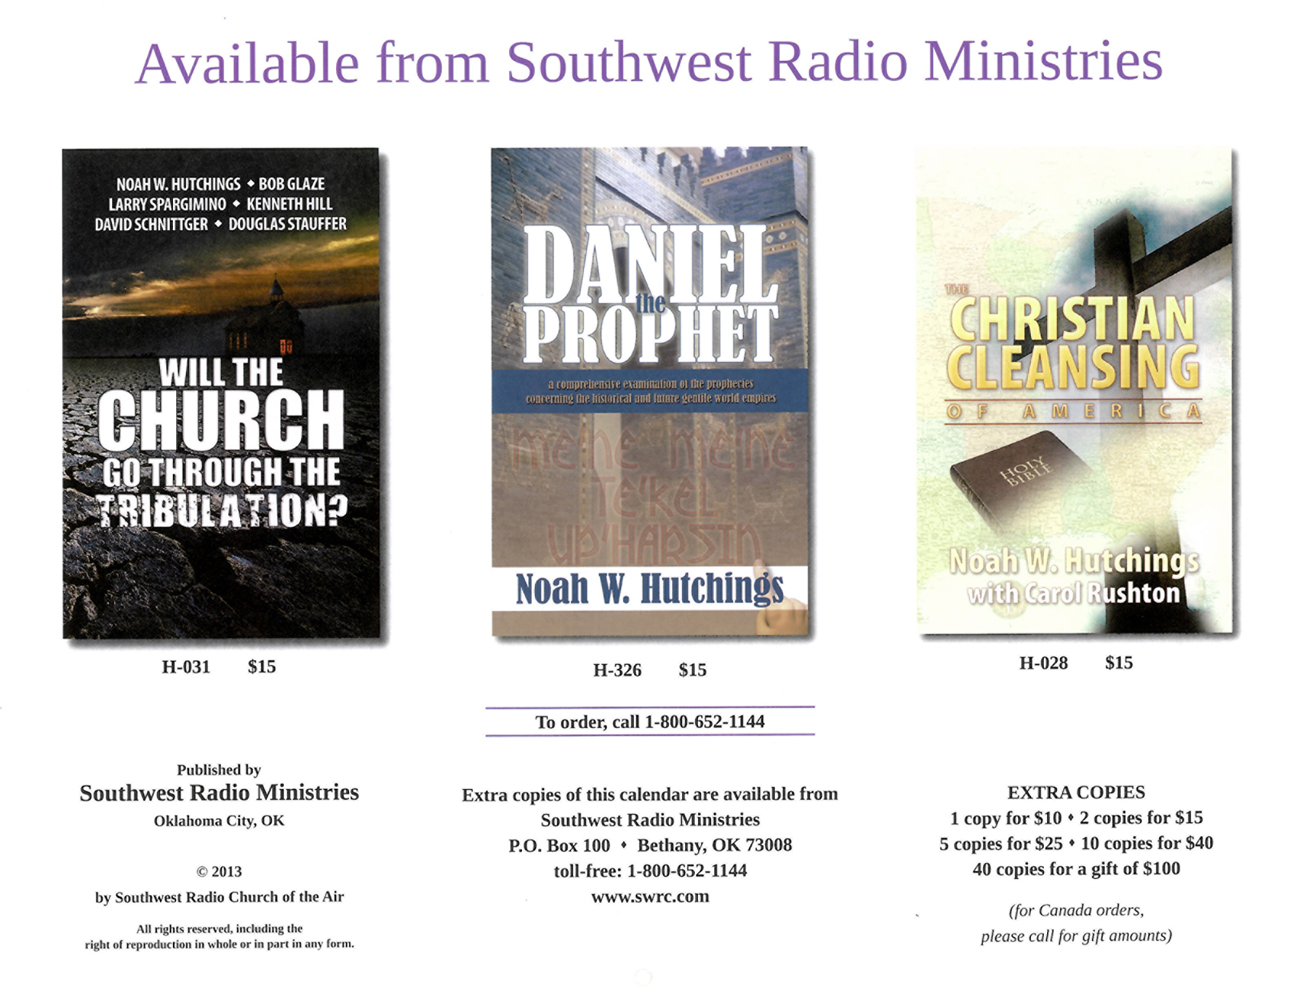 2014 Prophecy Calendar: Available from Southwest Ministries